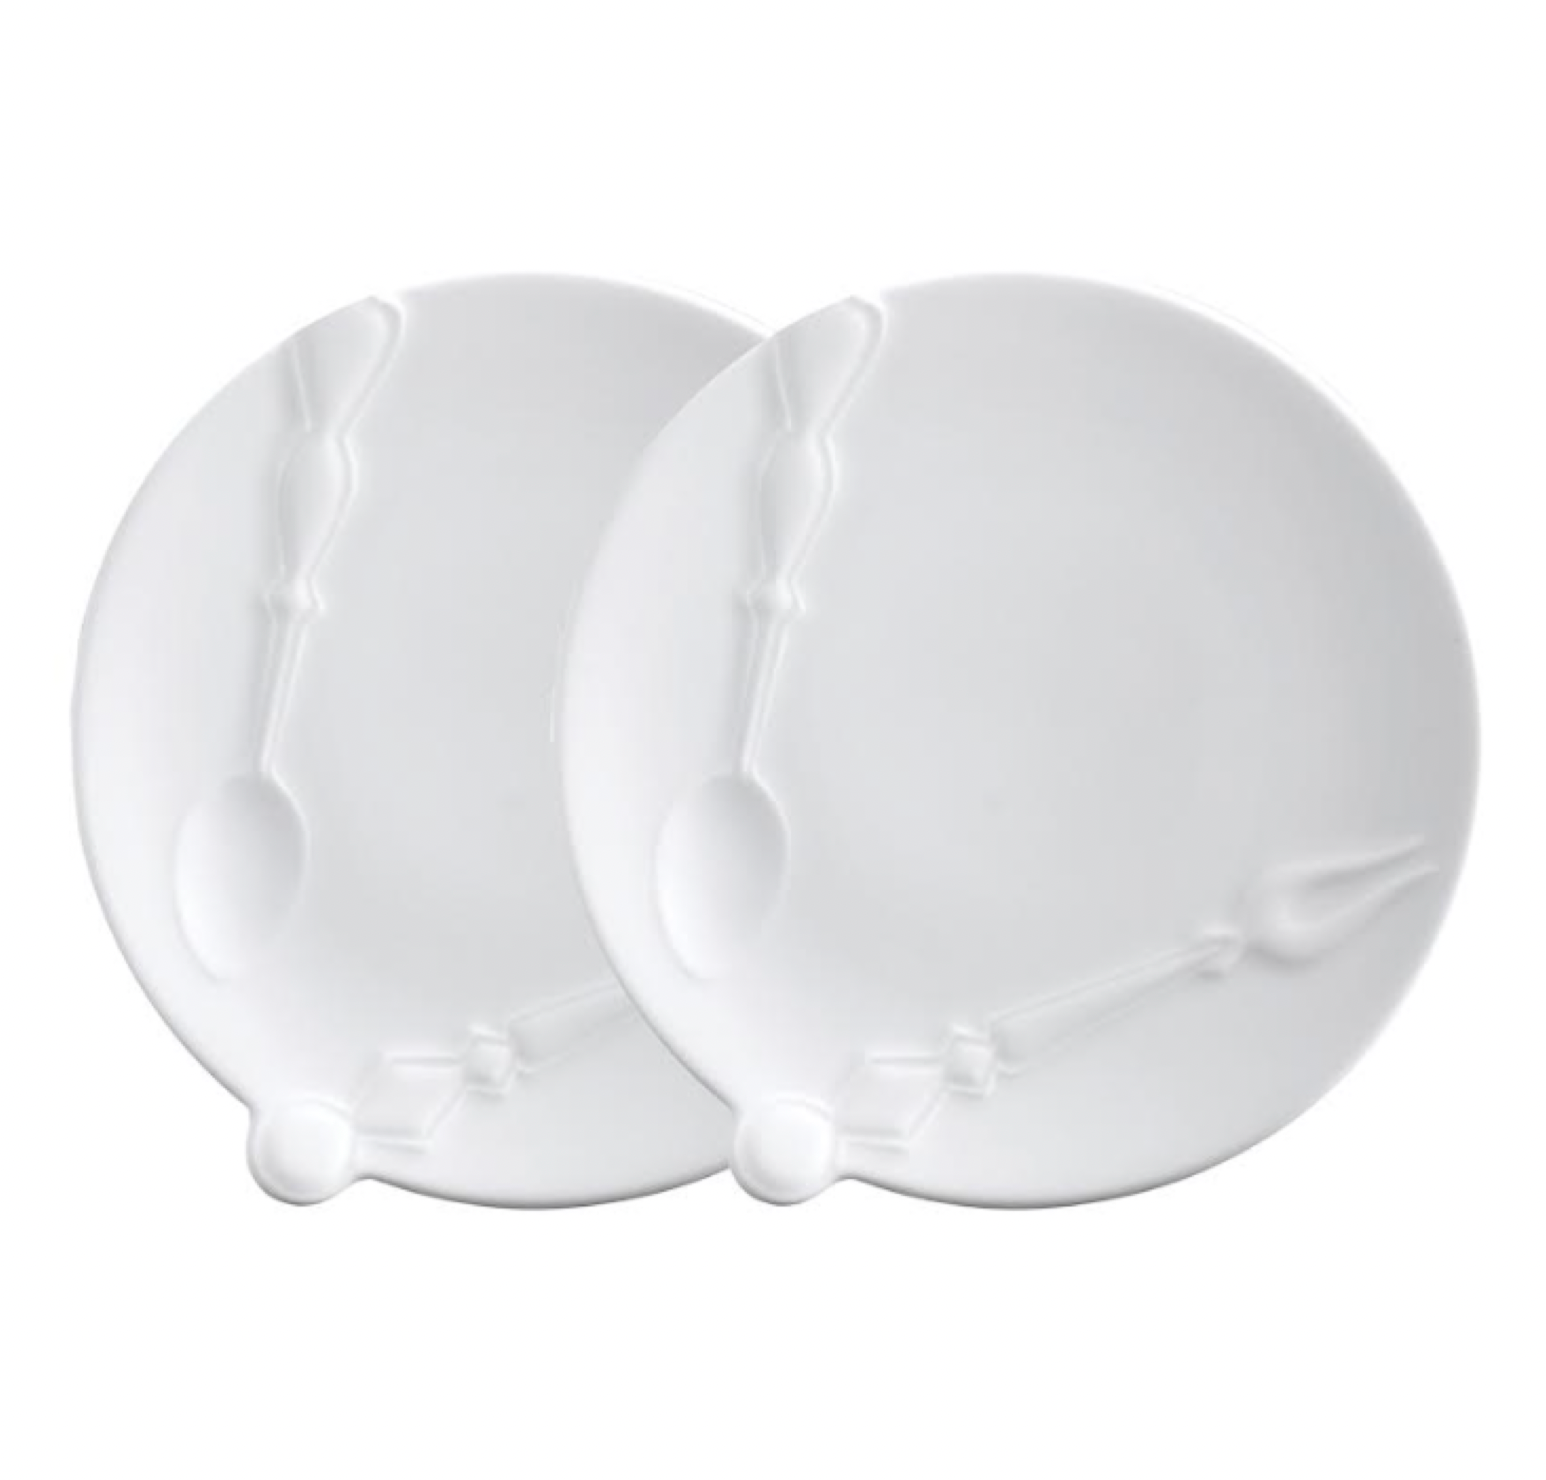 [Twig New York] Cutlery 7" Accent Plate set, 2pcs (A & B)